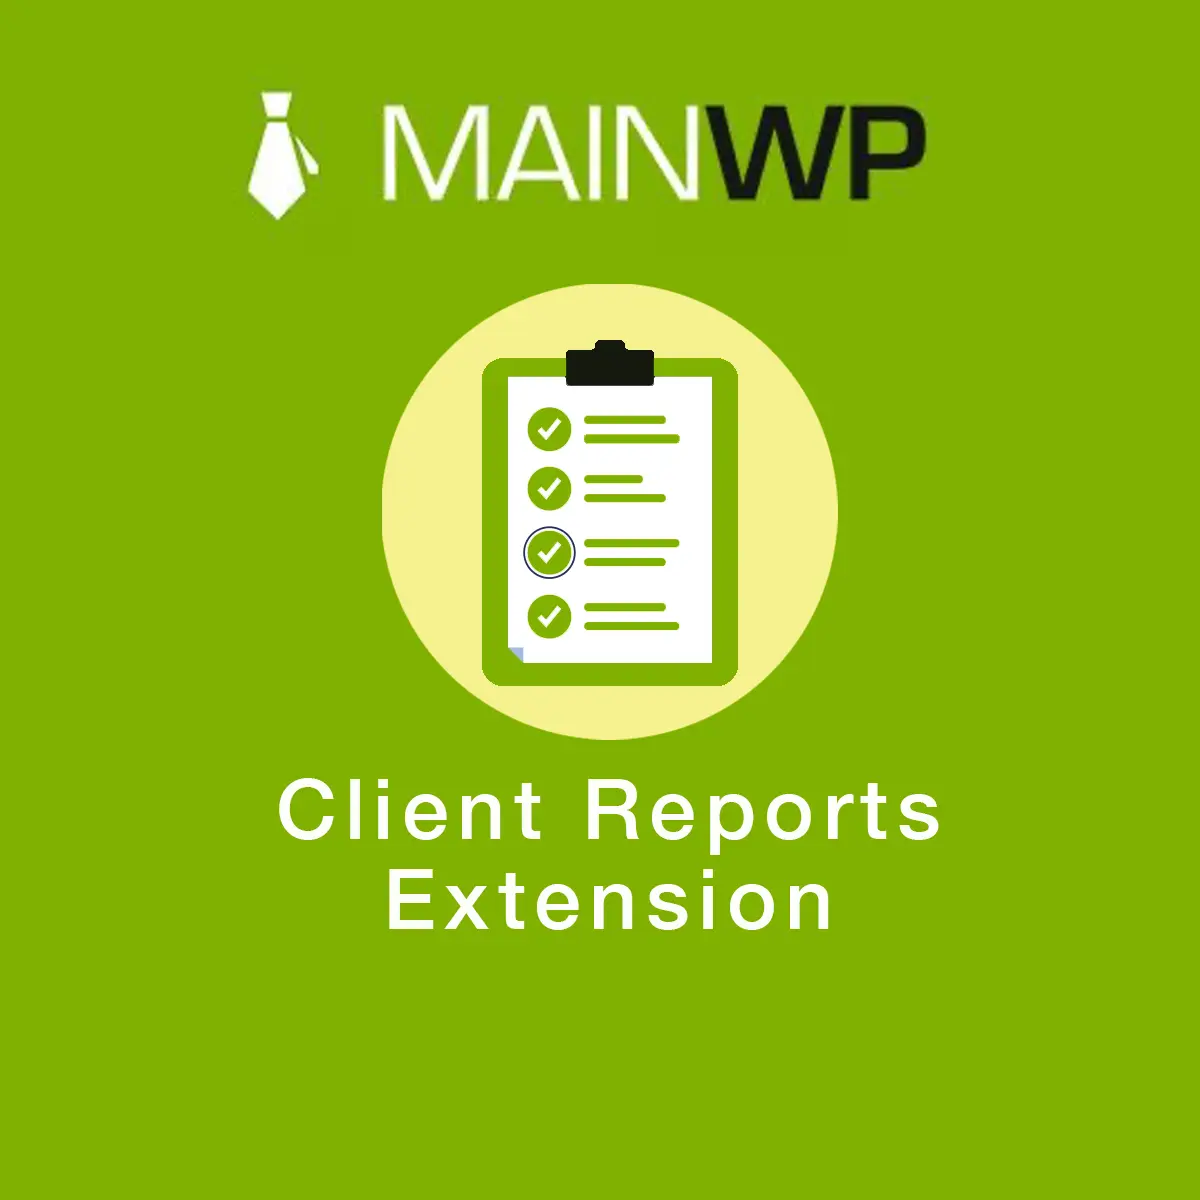 Download the MainWP Client Reports plugin